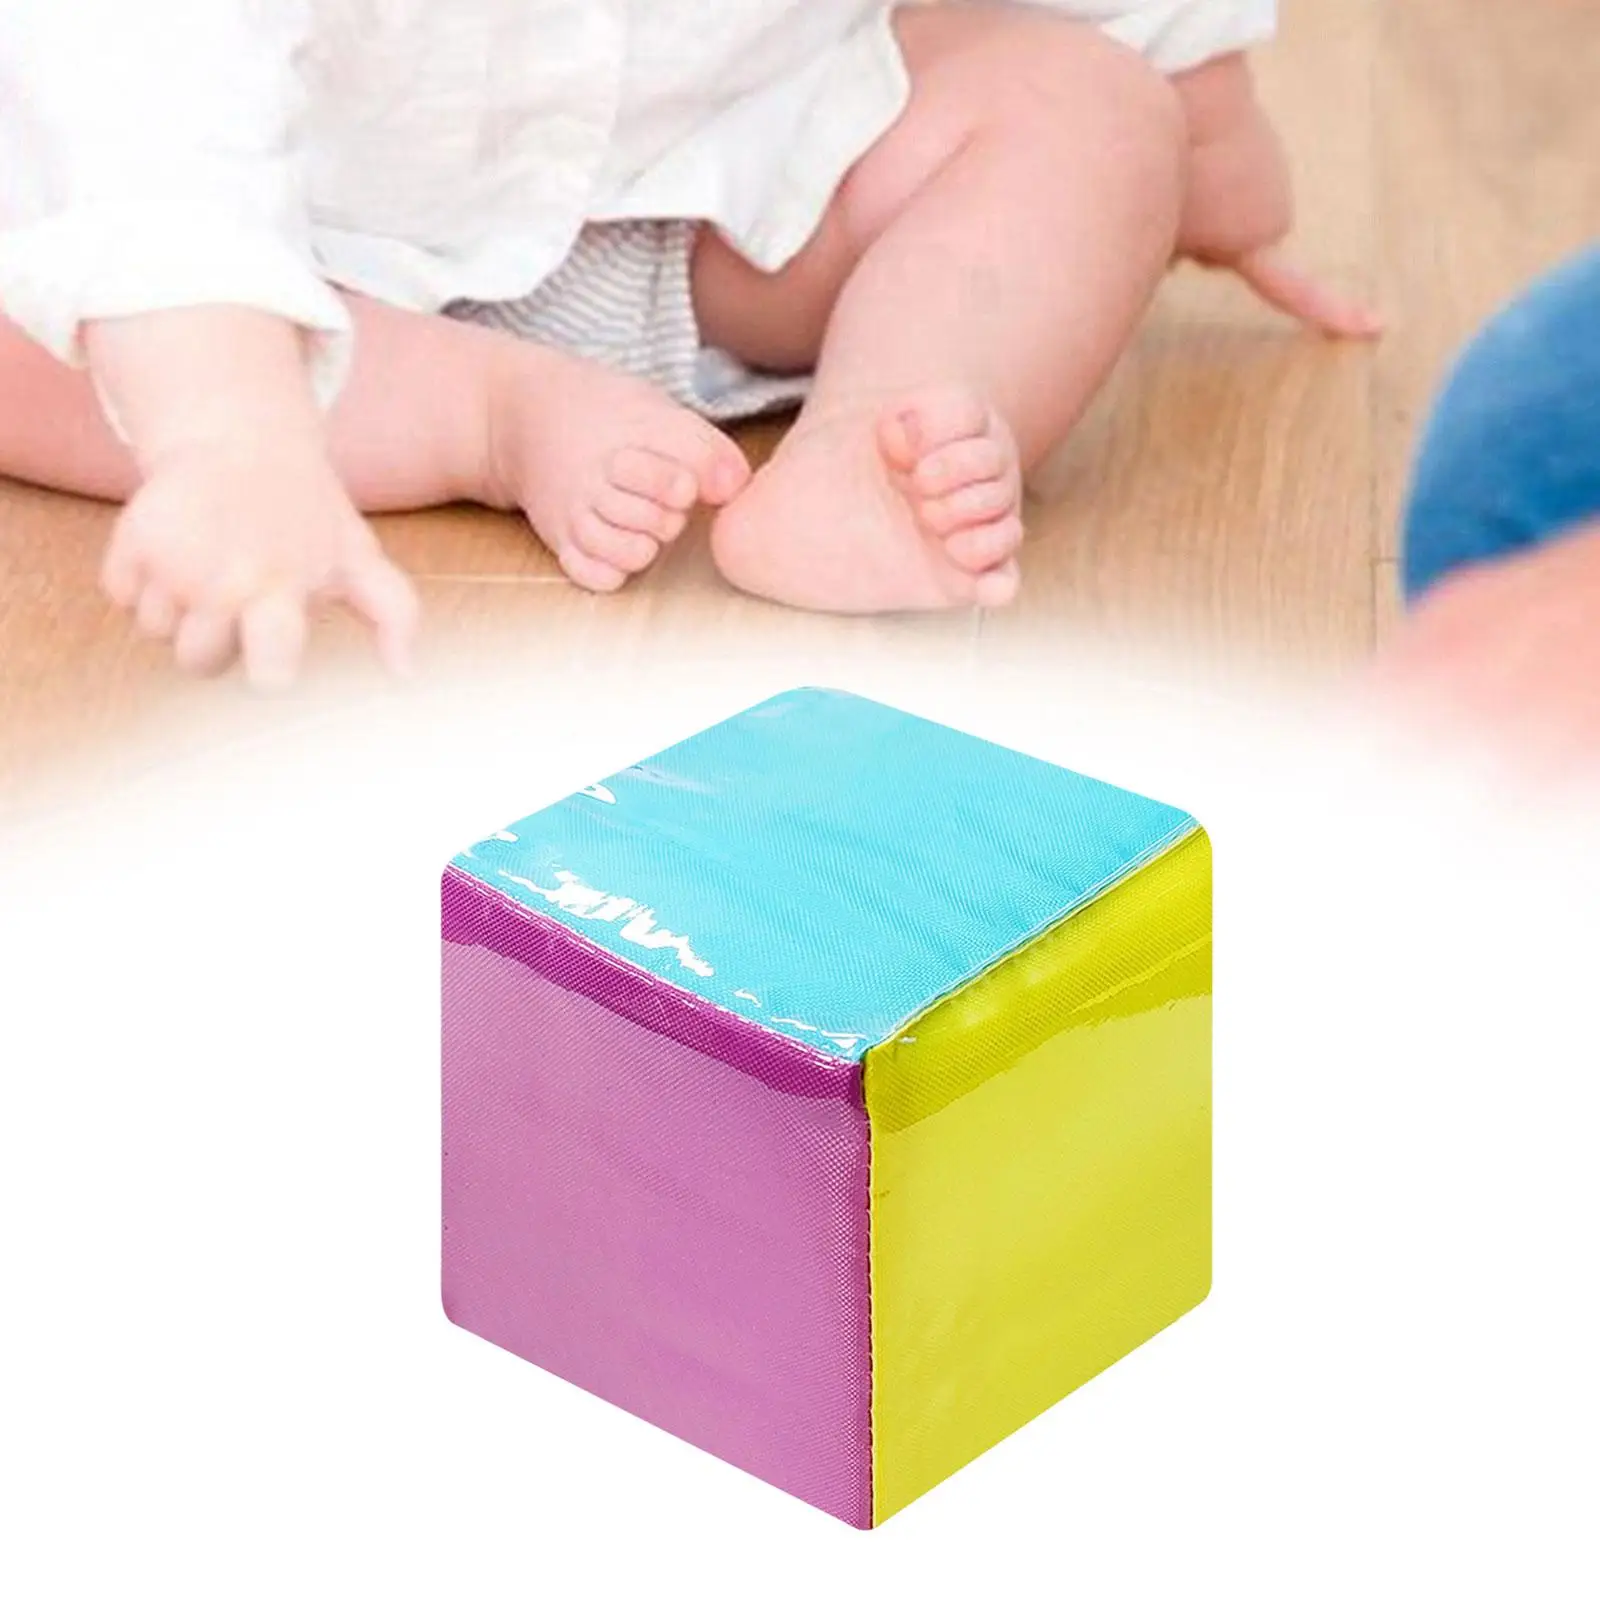 Education Playing Game Dice Toddlers Role Playing 10cm Soft Pocket Dice for Teaching Materials Blocks Toys Preschool Classroom